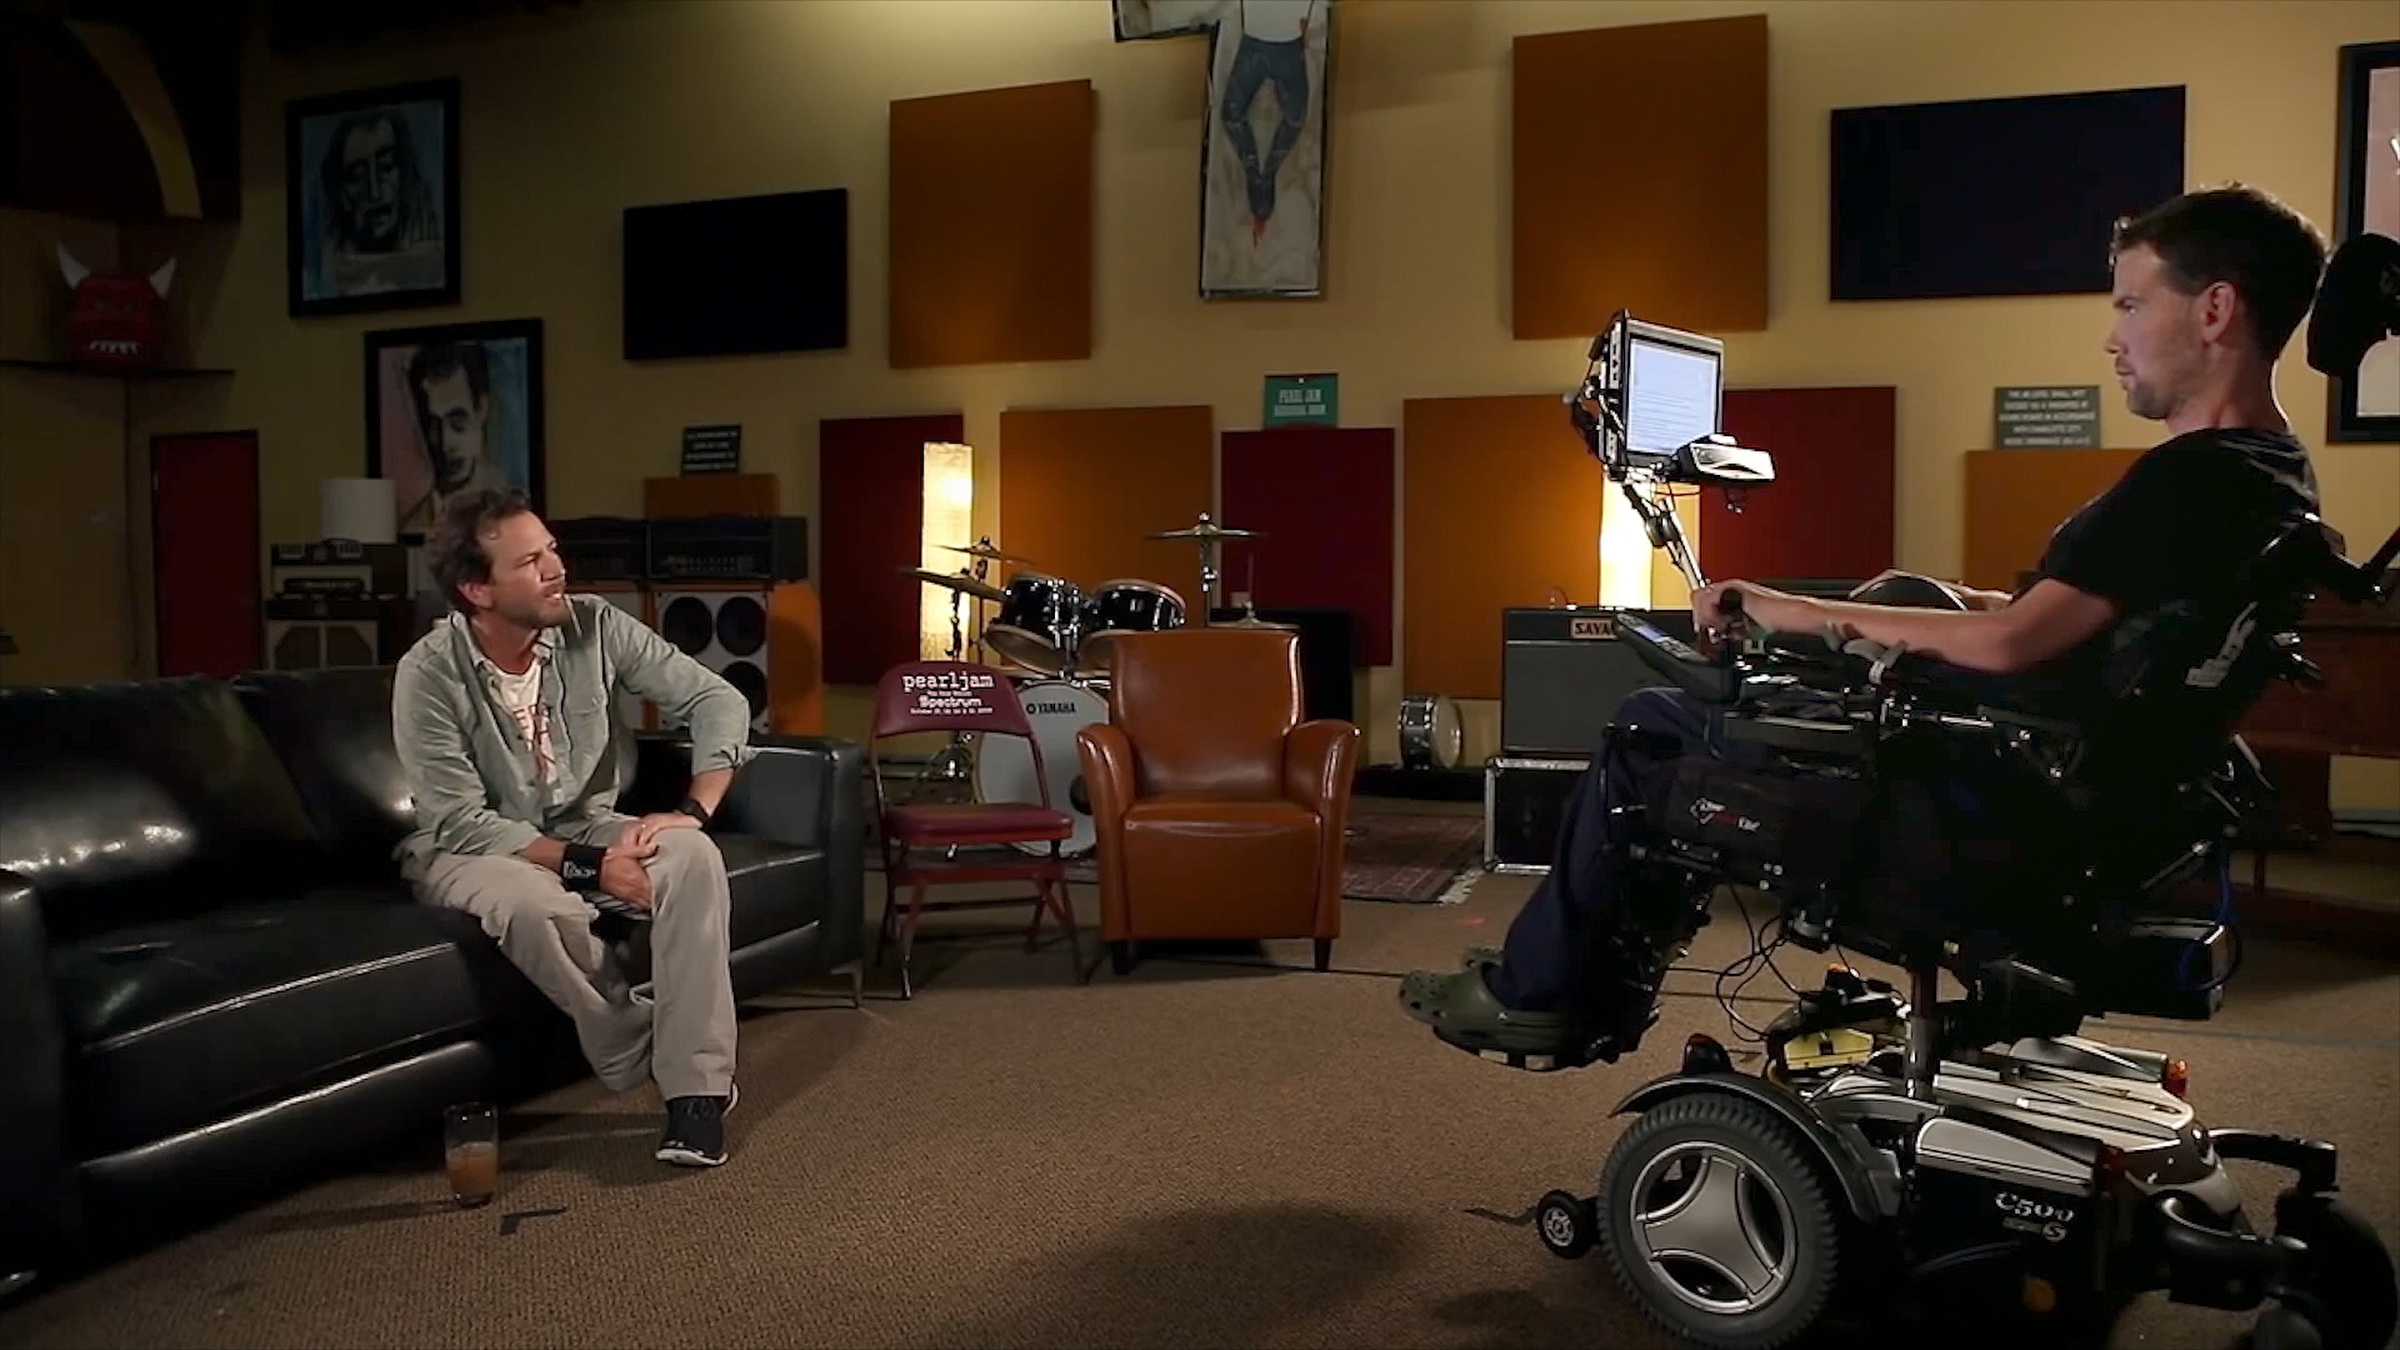 Mike McCready and Steve Gleason are shown in production work for the documentary "Gleason," which is about the life of Steve Gleason, the former New Orleans Saints defensive back who, at the age of 34, was diagnosed with amyotrophic lateral sclerosis, or ALS. (CNS photo/courtesy of Open Road Films) See SAINTS-GLEASON-FAITH Aug. 2, 2016.